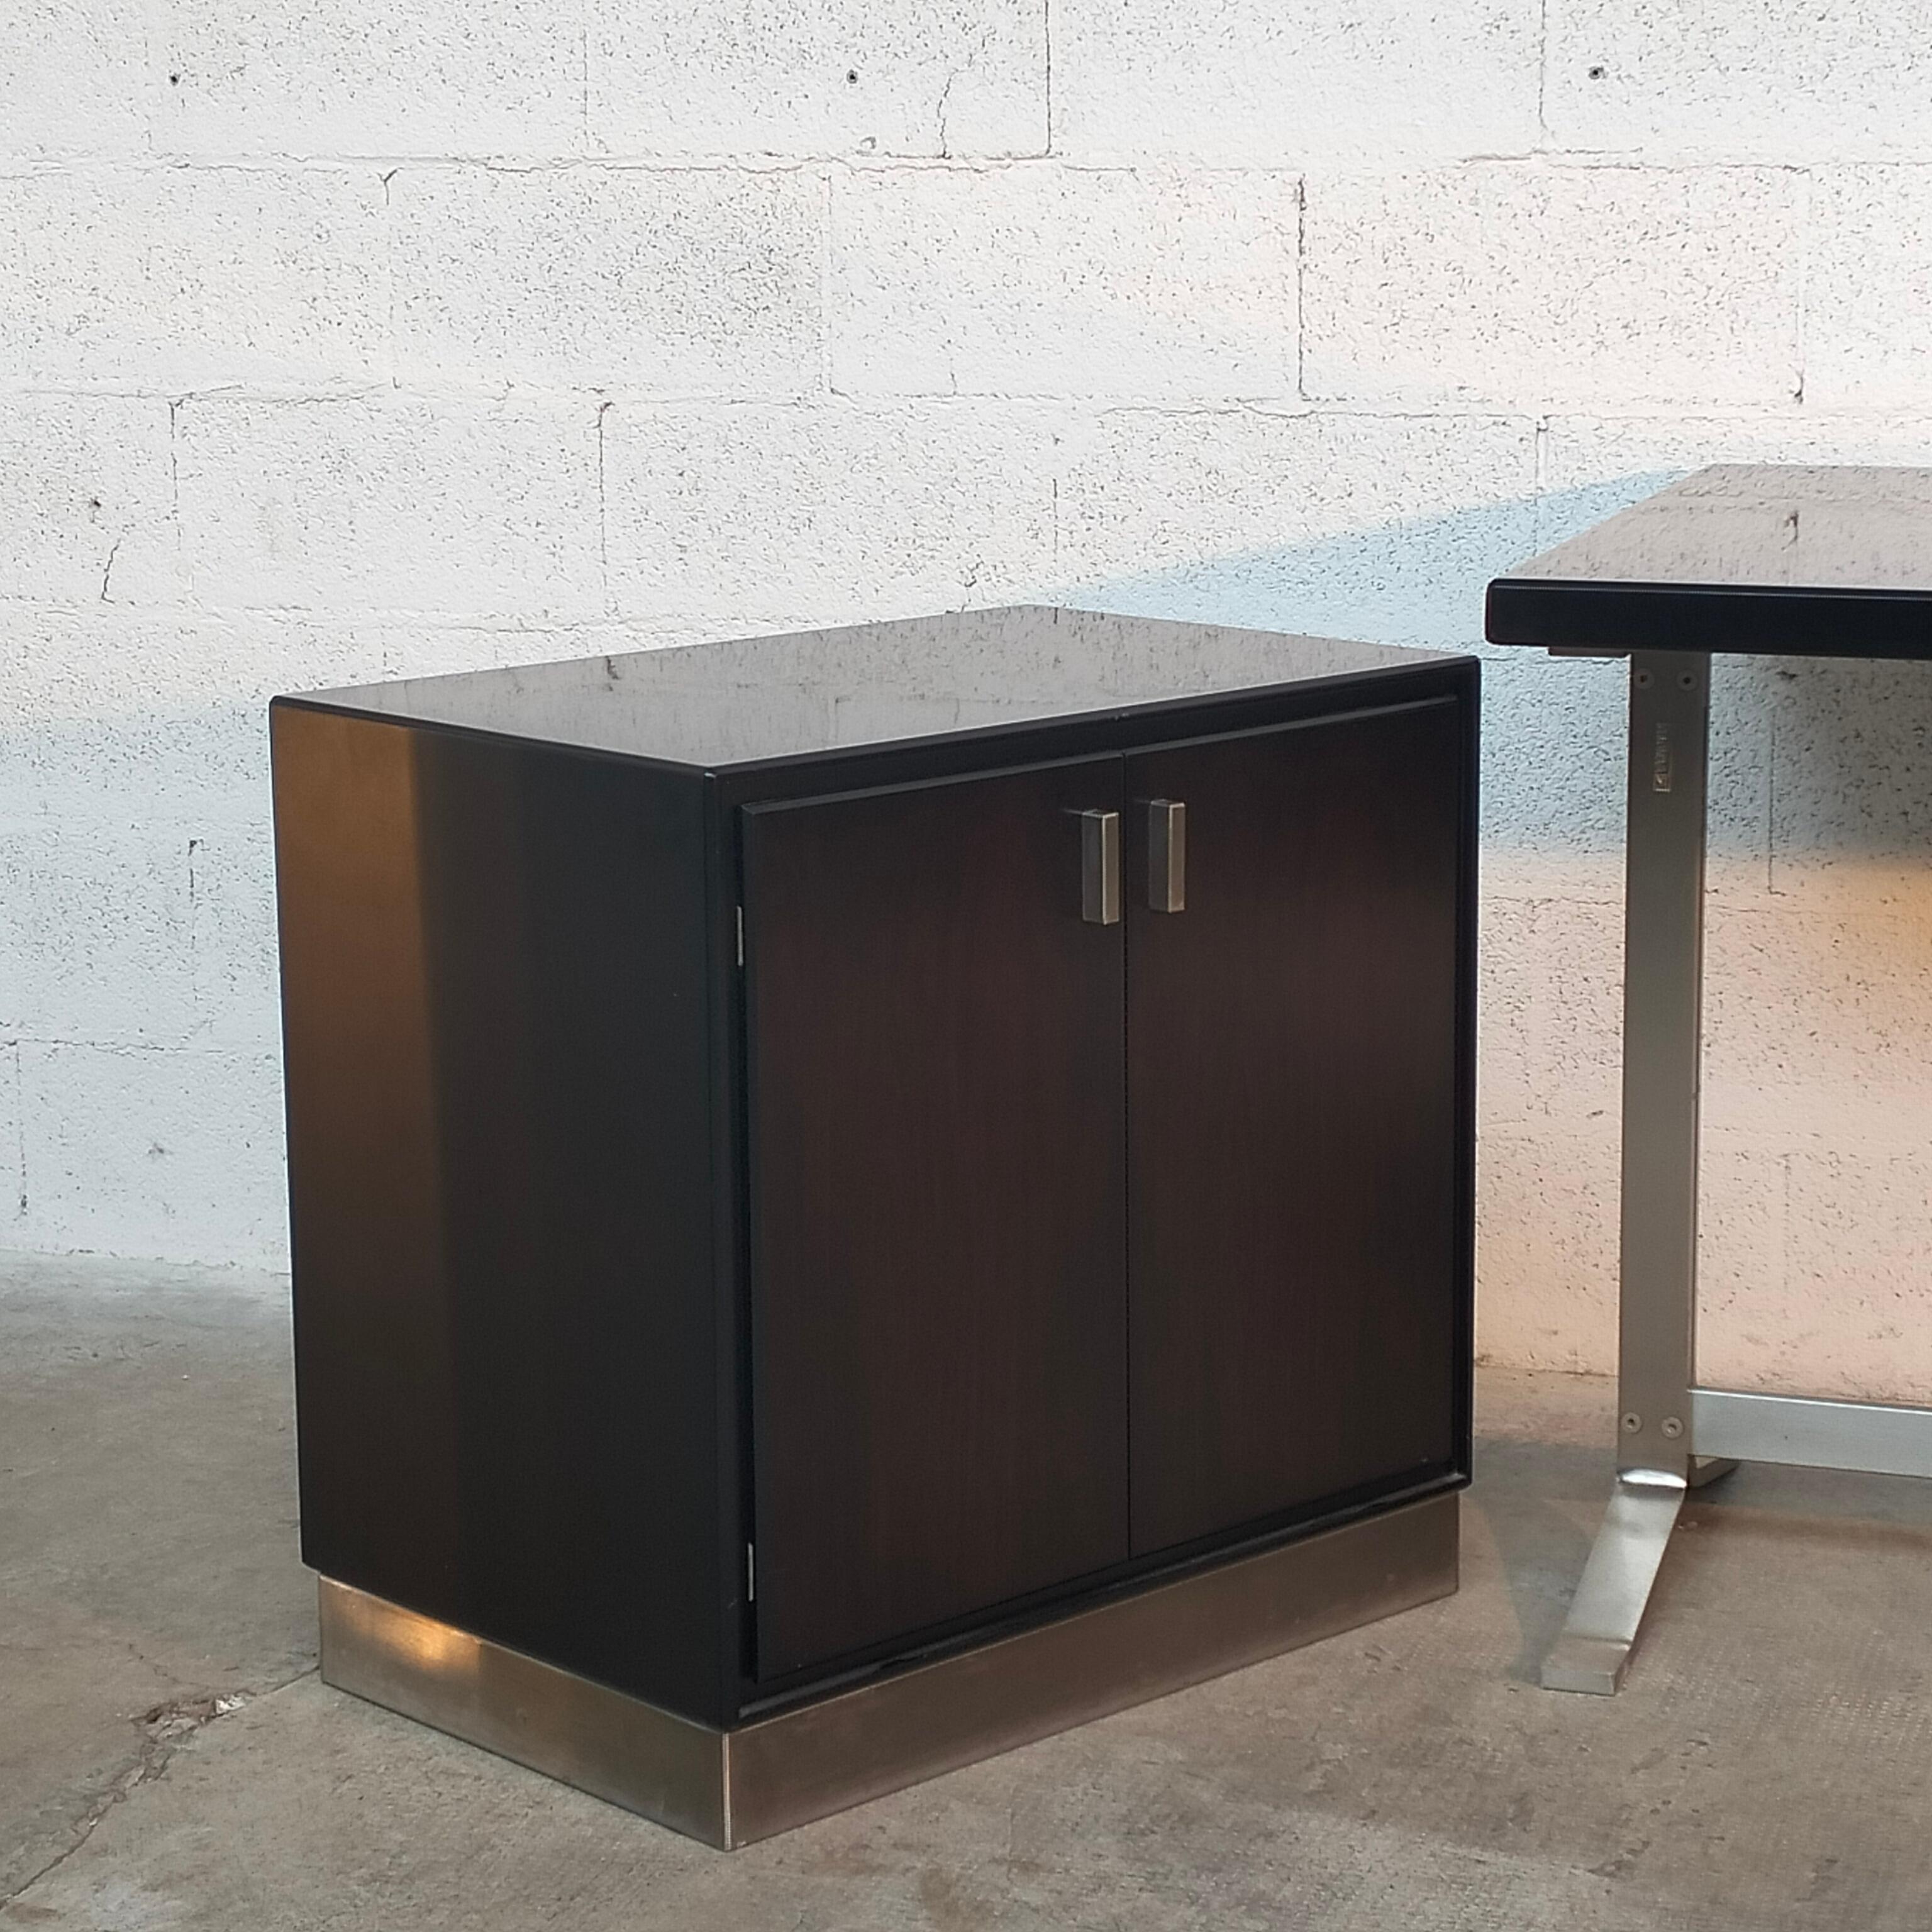 Metal and wooden Desk and small Cabinet by Gianni Moscatelli for Formanova 60s  
Cabinet dimensions : 45D - 70W - 67H

Formanova was born from the creativity, passion and enterprising spirit of Gianni Moscatelli. Born in 1930, the last of six